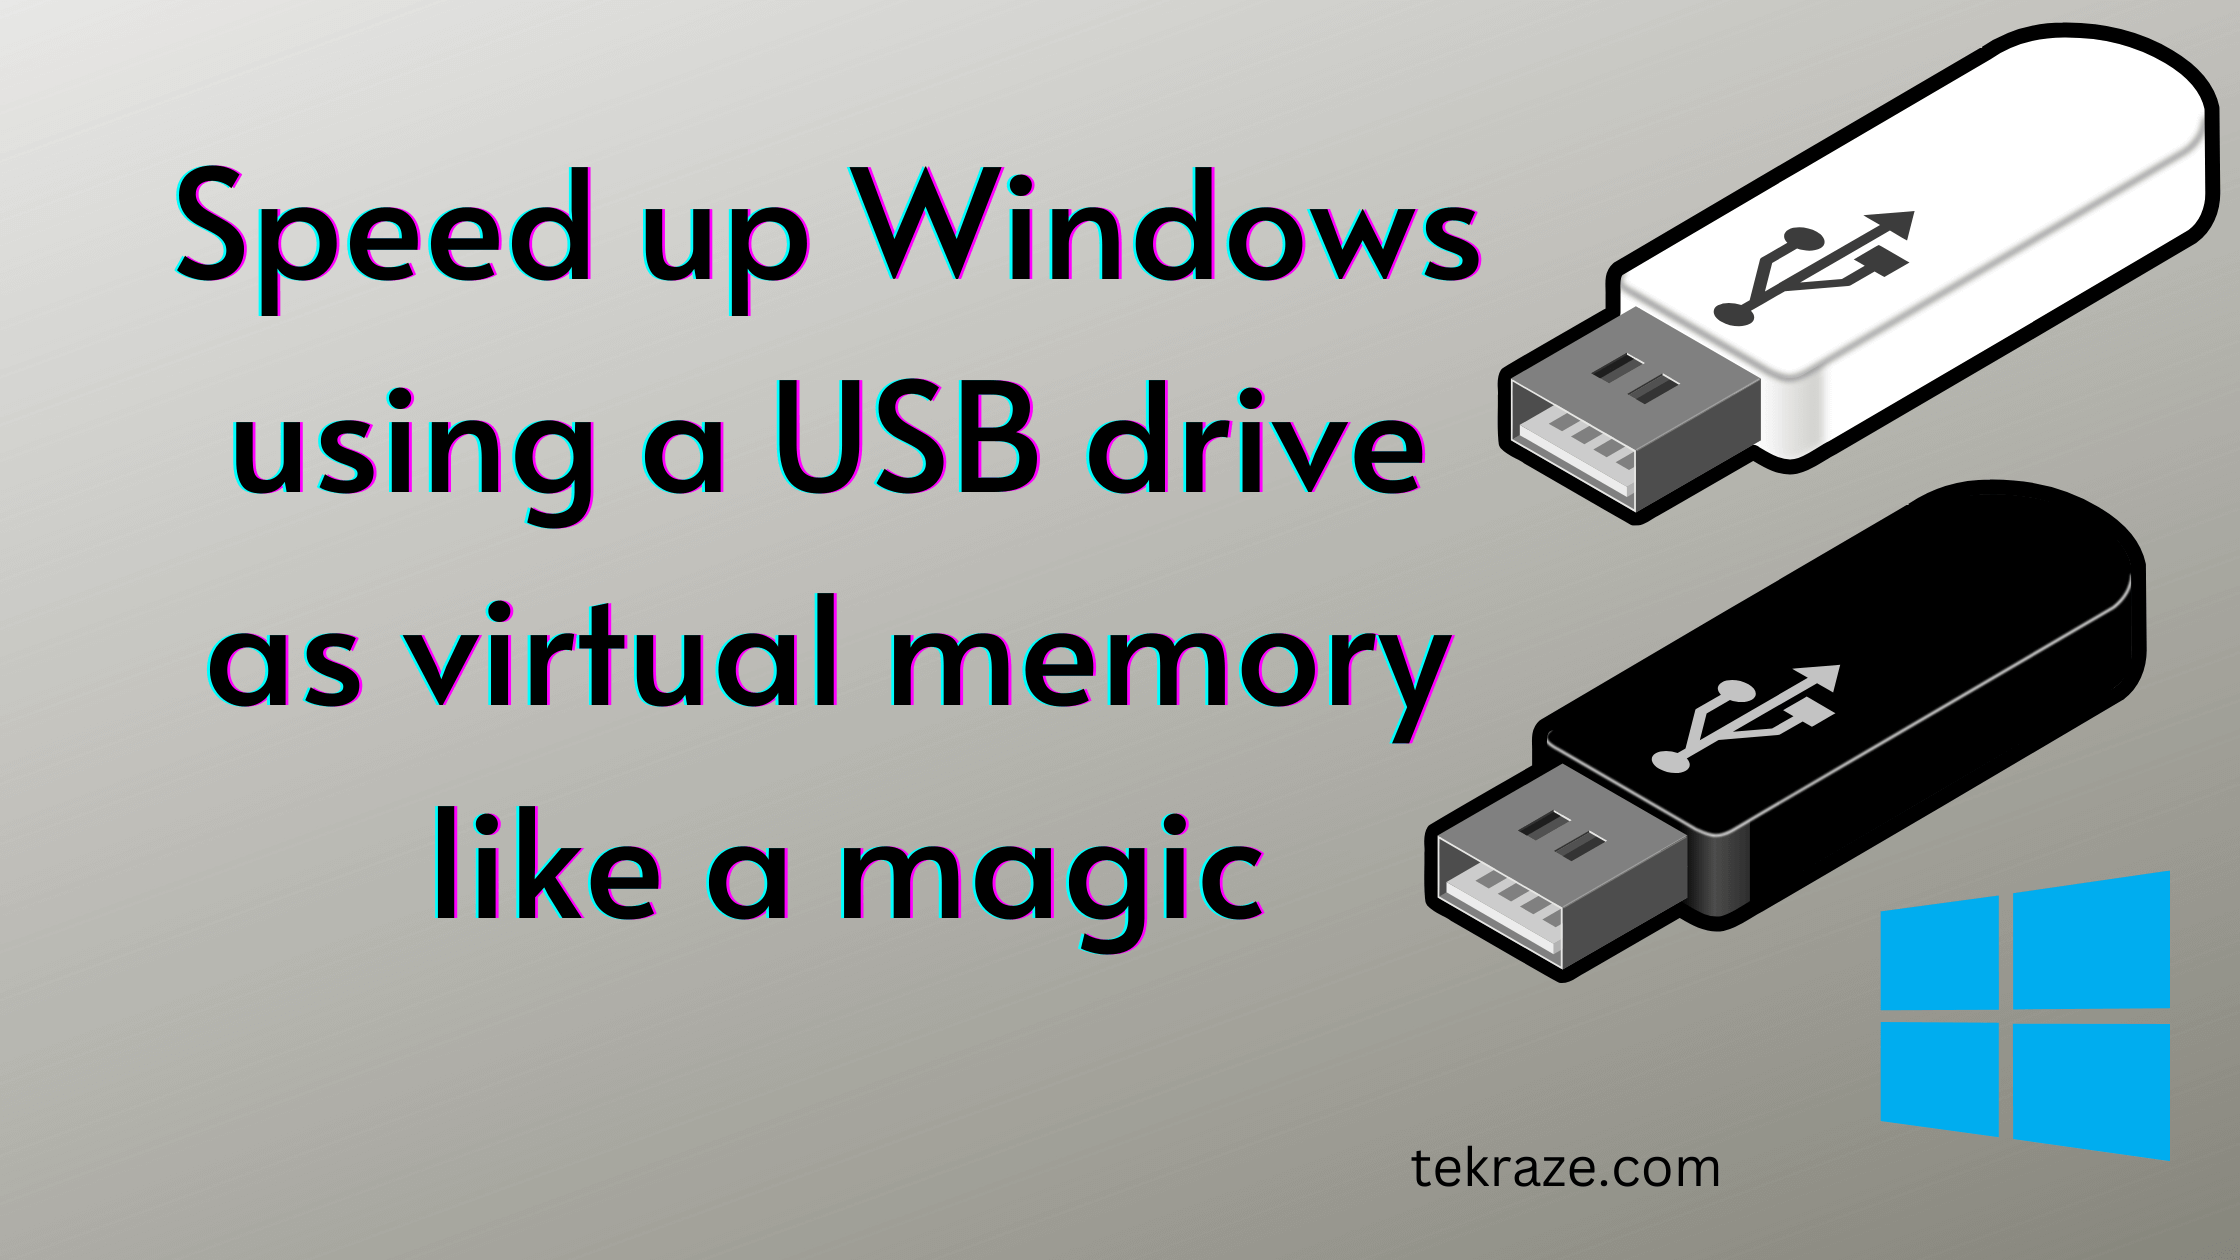 Speed up Windows using USB Drive as virtual memory with Readyboost